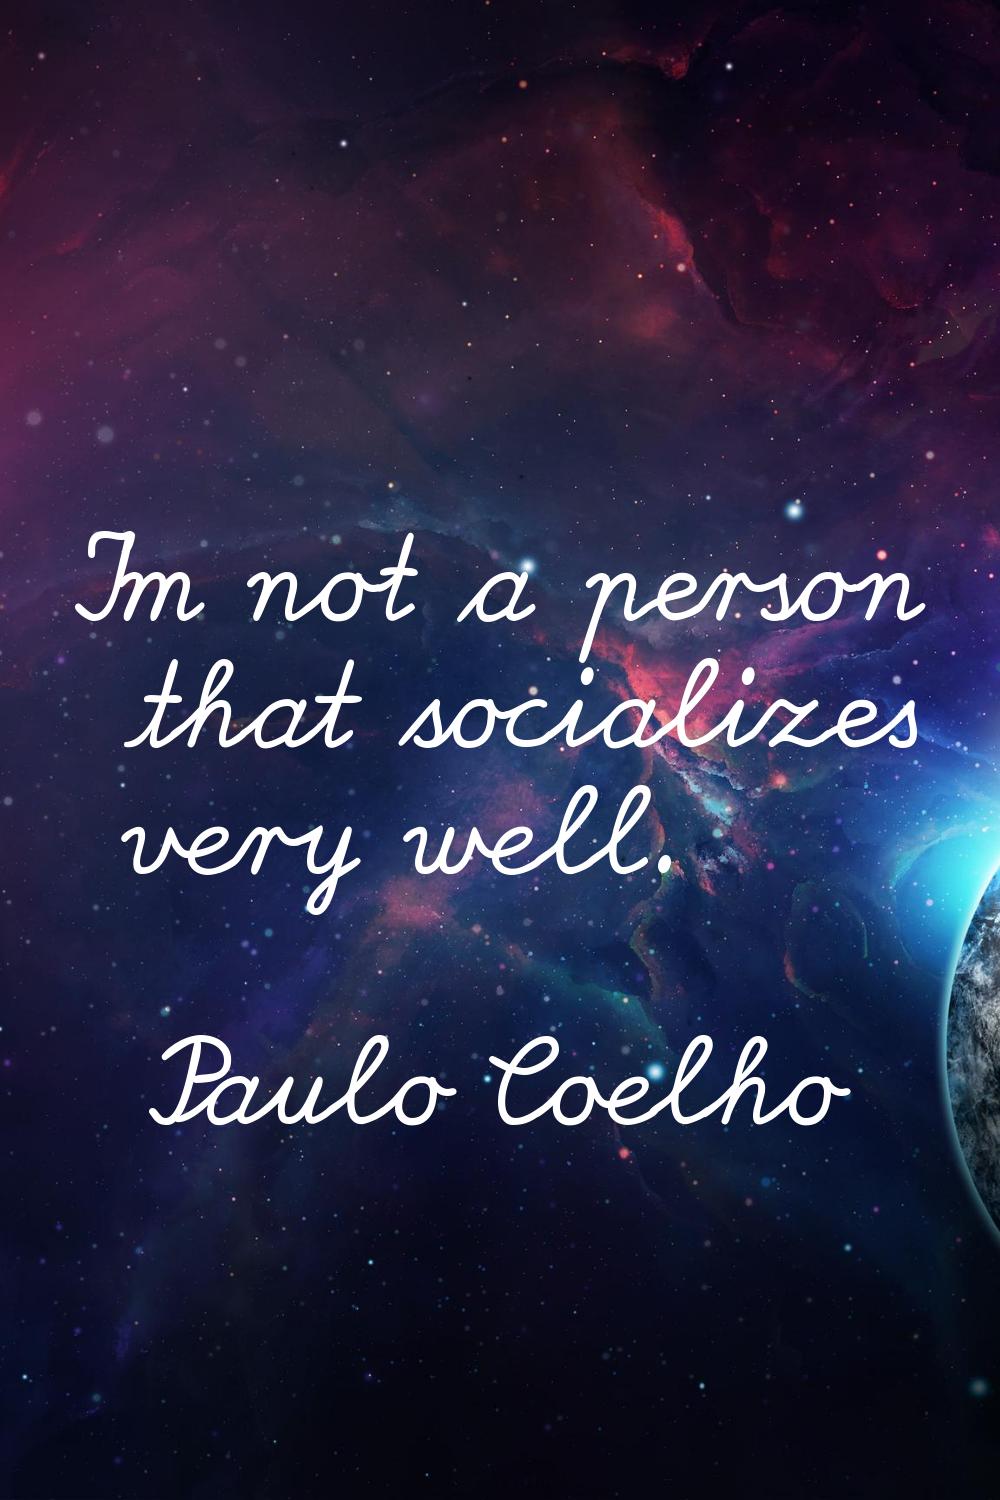 I'm not a person that socializes very well.